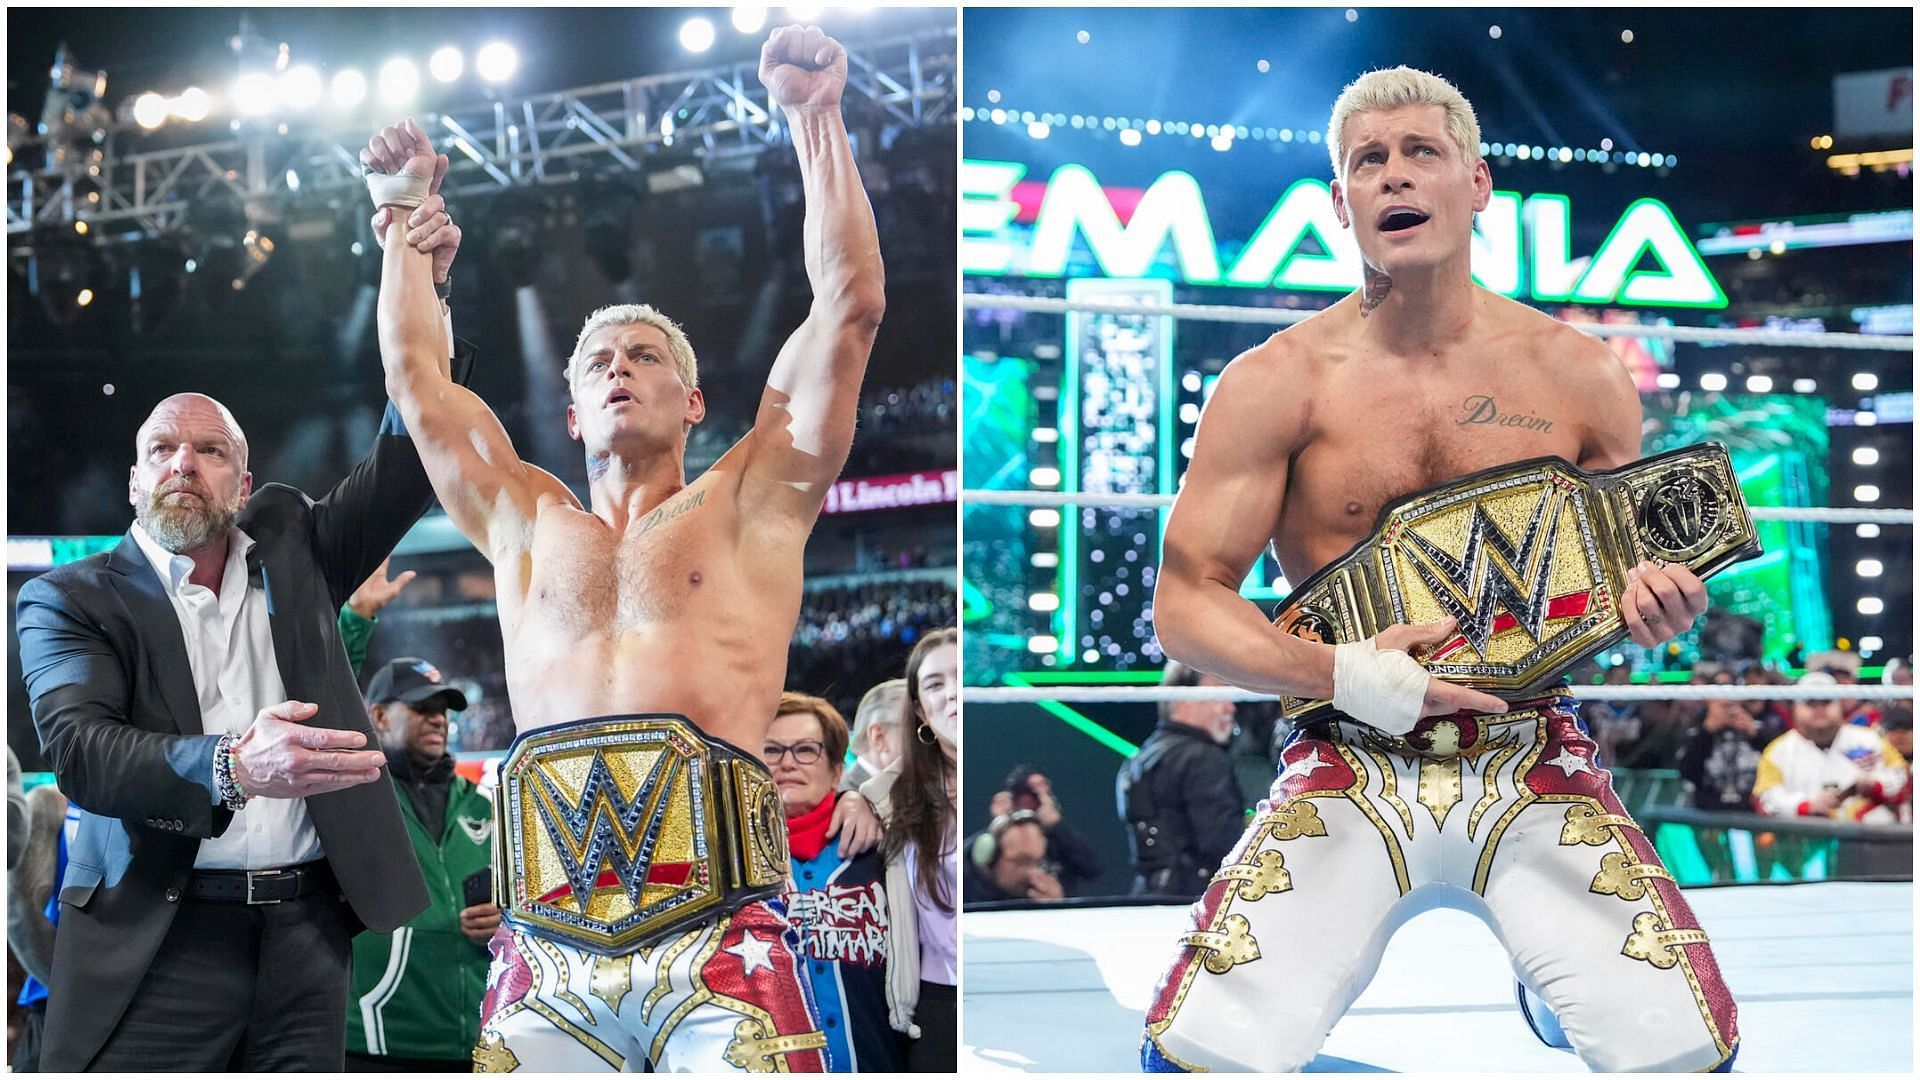 Cody Rhodes is the current Undisputed WWE Champion.